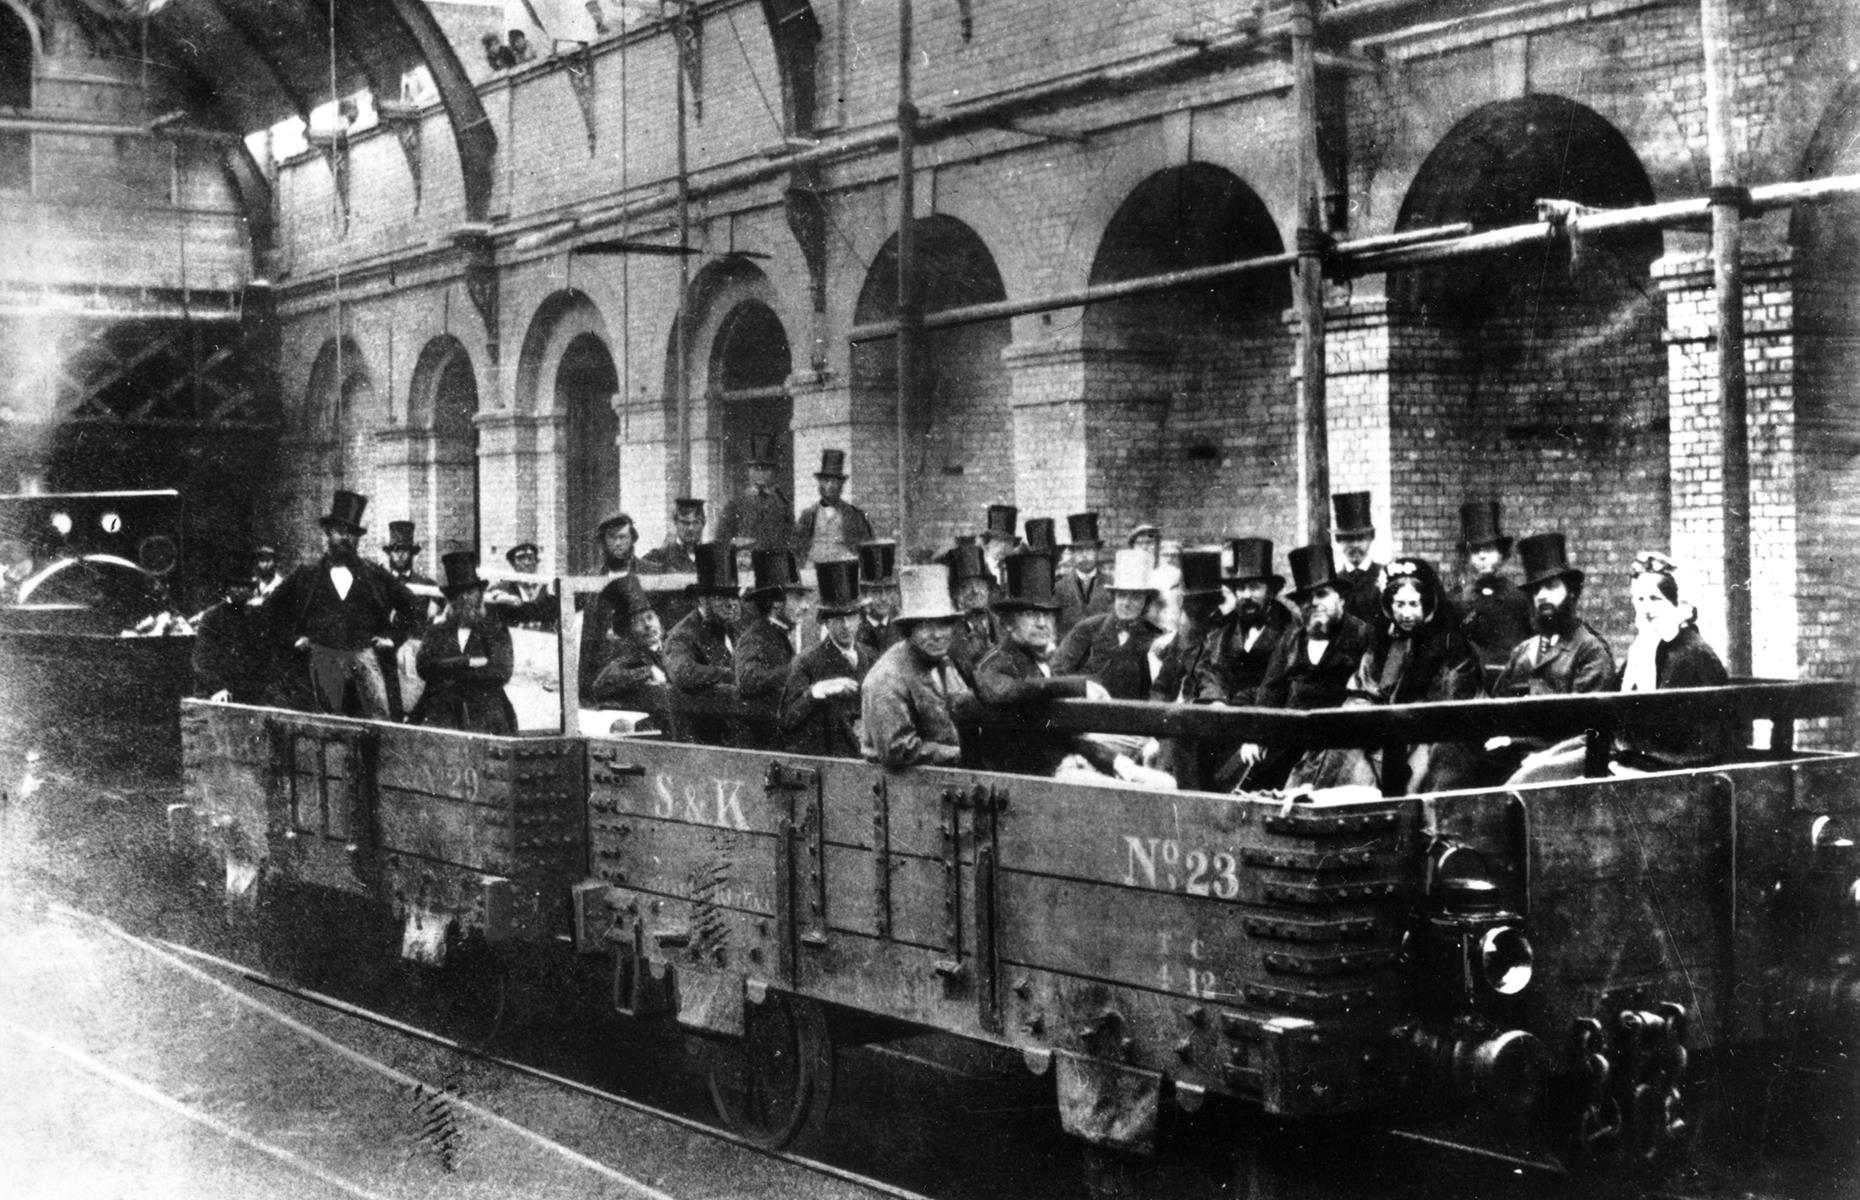 The Big Smoke changed the nature of urban travel forever when the London Underground debuted in the 1860s. The initial route traveled between Paddington and Farringdon Street and was the world's very first subterranean passenger system. Pictured here in 1862, dignitaries, including the Chancellor of the Exchequer, are given a sneak peek of the railway before it opens to the public in 1863.